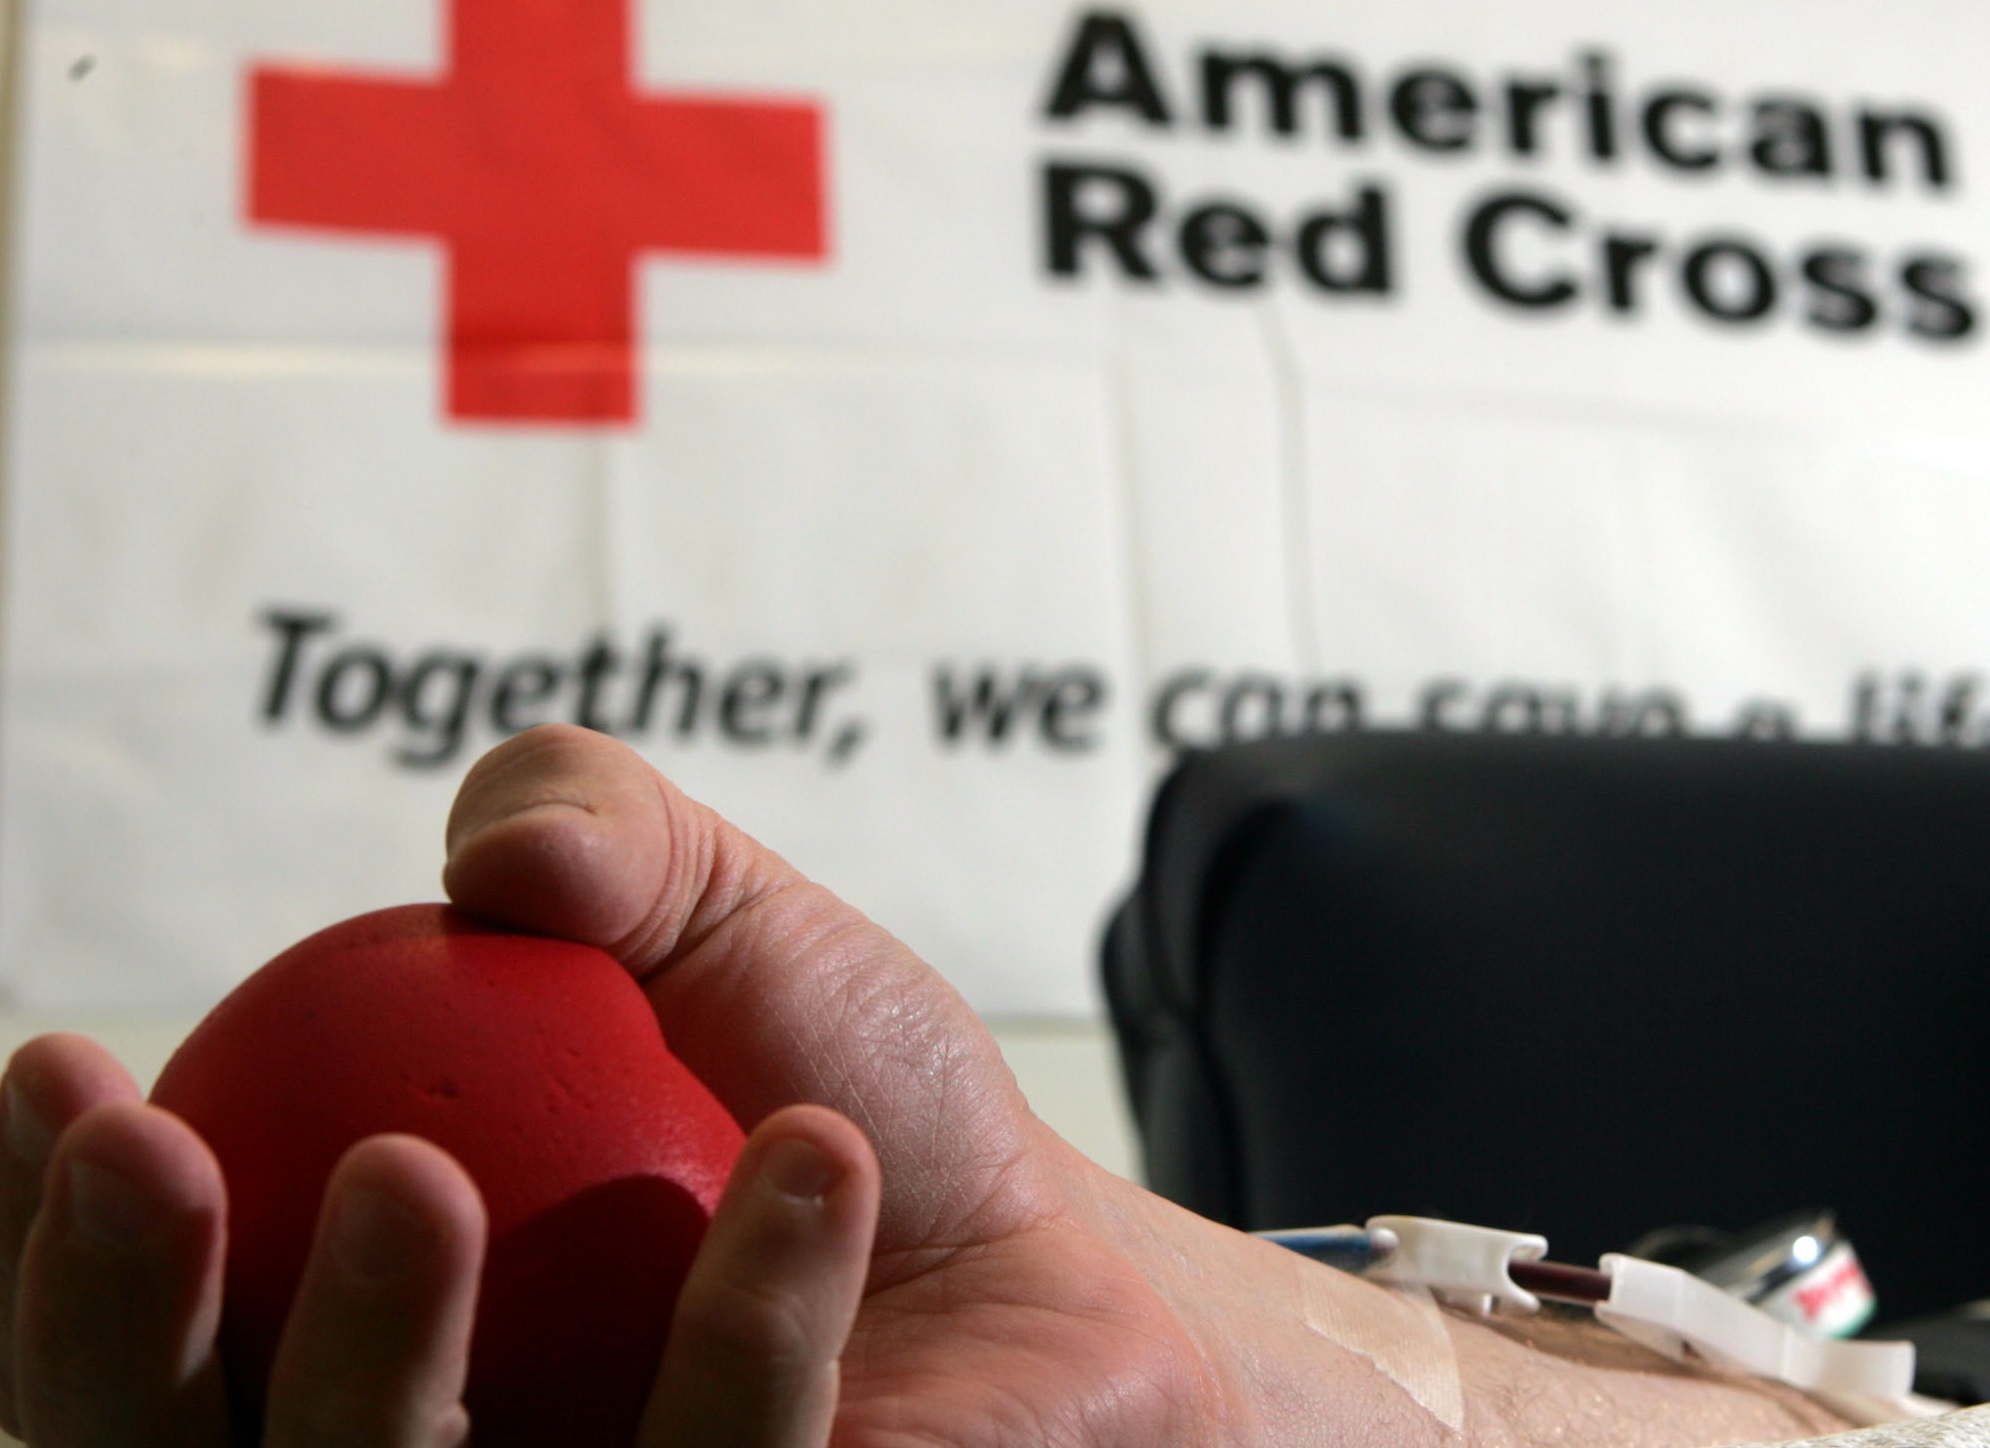 A blood donor squeezes a stress ball